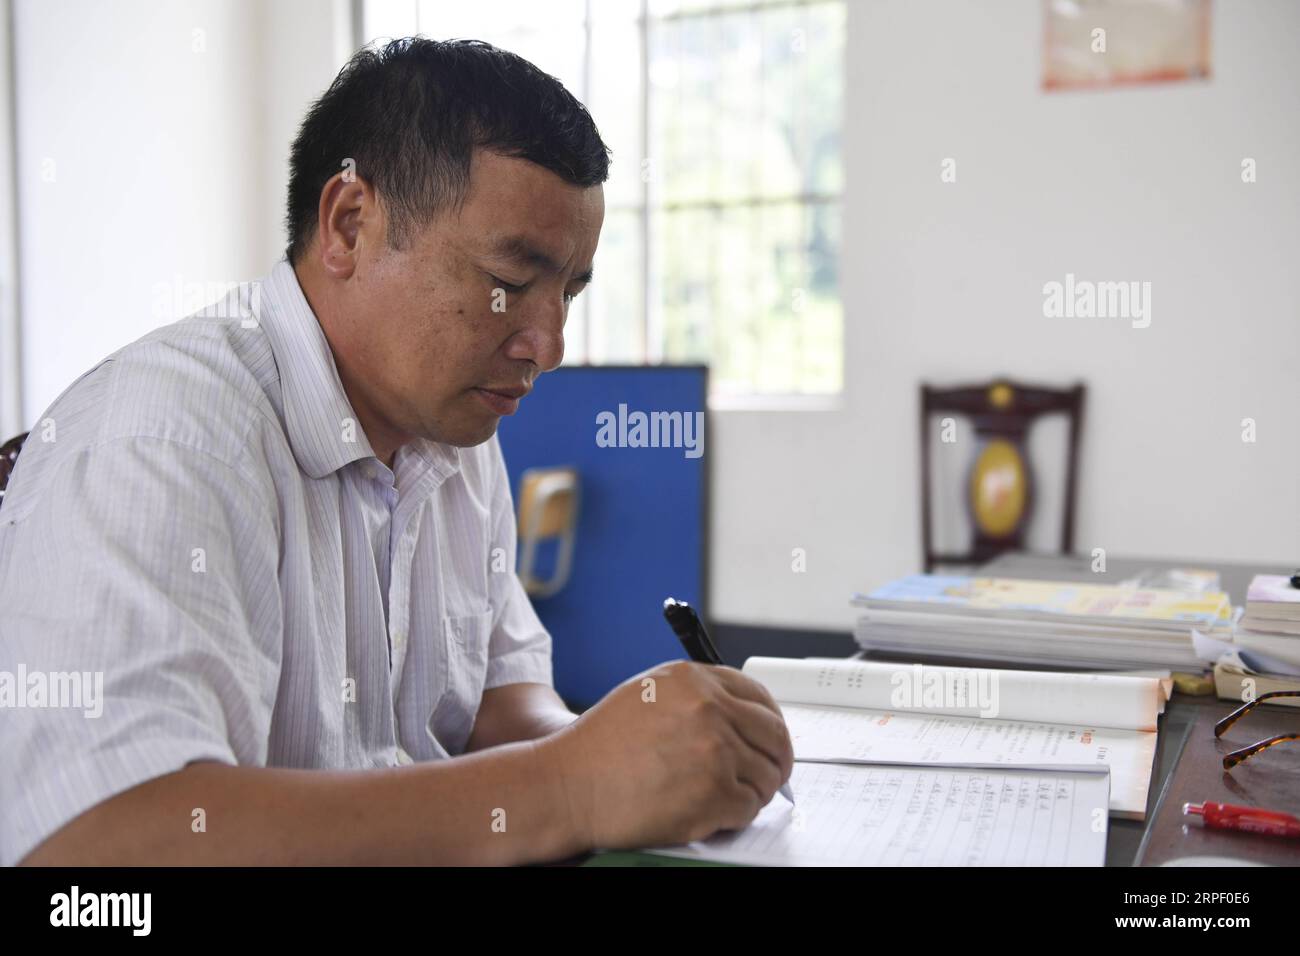 (190908) -- TIANDONG, Sept. 8, 2019 -- Wei Guoji prepares lessons at the office of Tuogua Primary School at Tuogua Village in Zuodeng Yao Ethnic Township of Tiandong County, south China s Guangxi Zhuang Autonomous Region, Sept. 3, 2019. Located in remote mountains of Tiandong county, Tuogua primary school is over 60 km away from the county seat, to which only a rugged mountain road can lead. The 53-year-old Wei Guoji, a native to the village, is the principal of the village school. Wei was recruited as a substitute teacher of the school after graduation from junior high school at the age of 18 Stock Photo